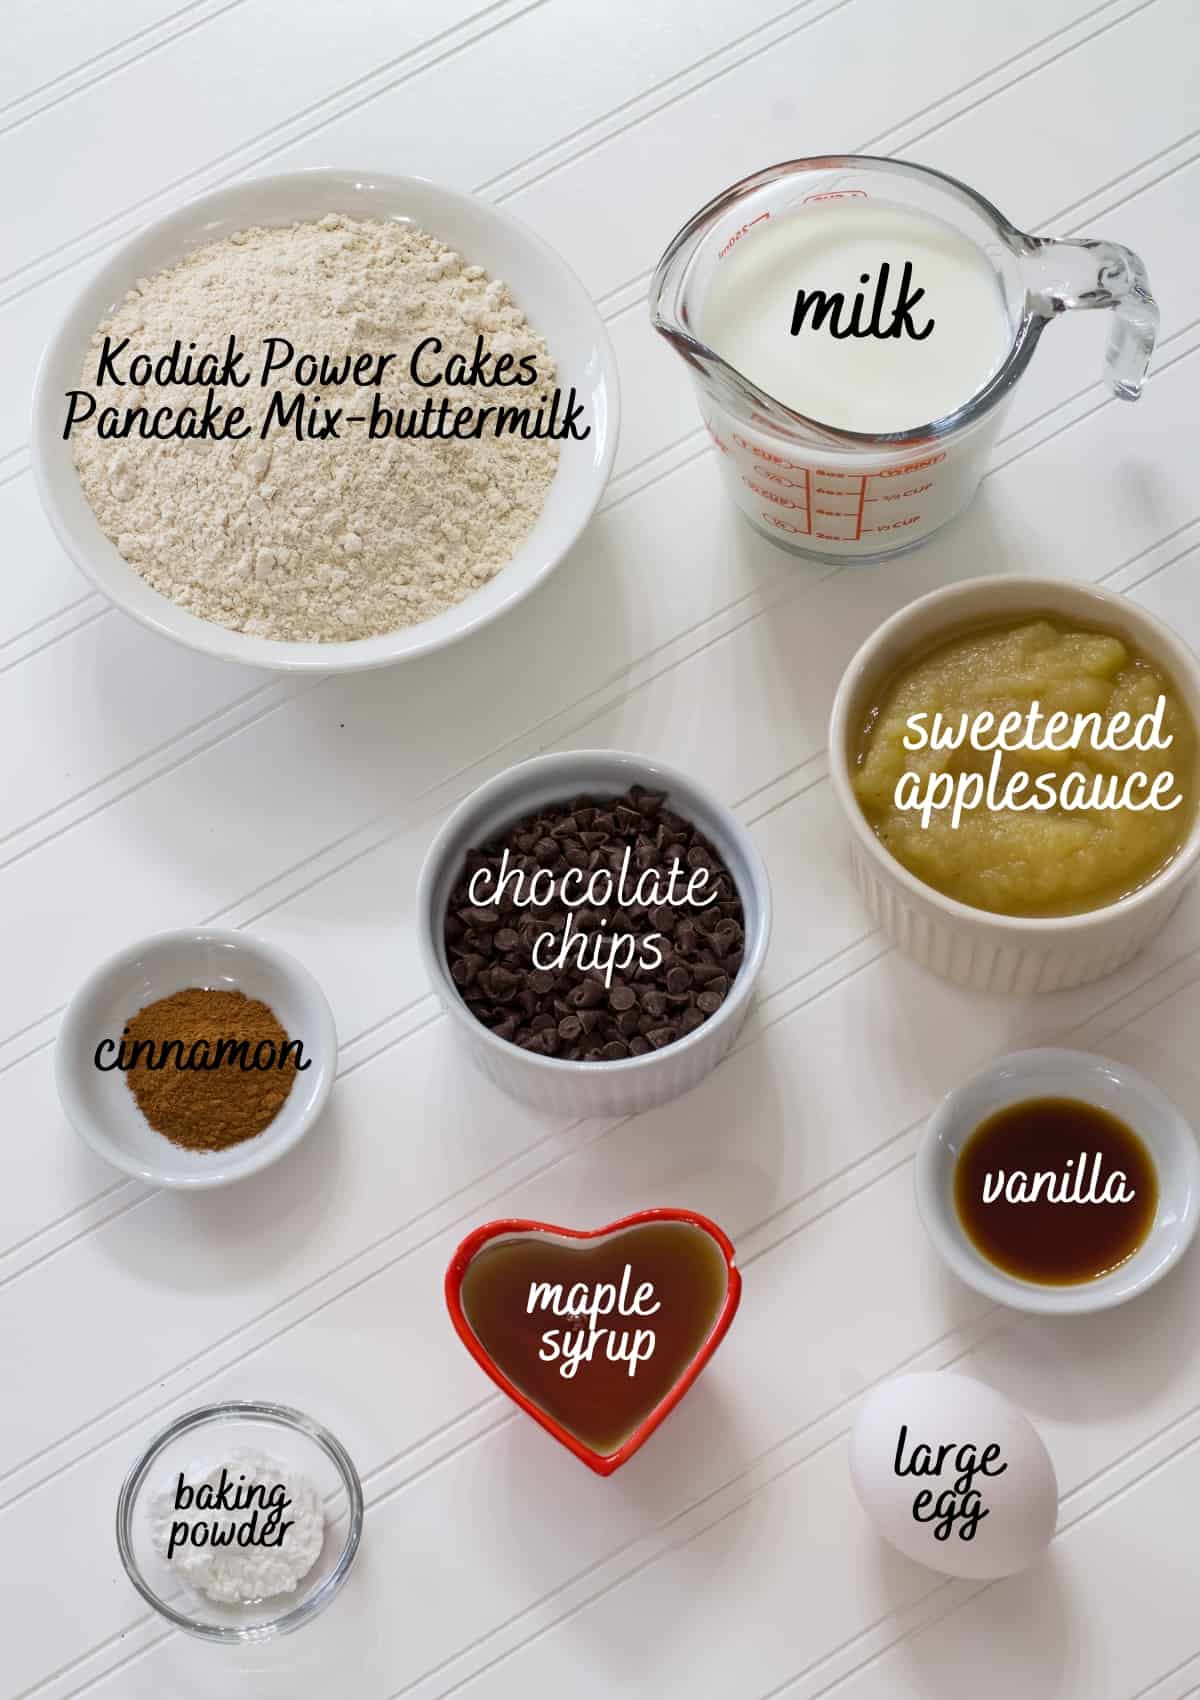 All of the ingredients needed to make kodiak cake muffins with the text on the image to specify what every ingredient is.